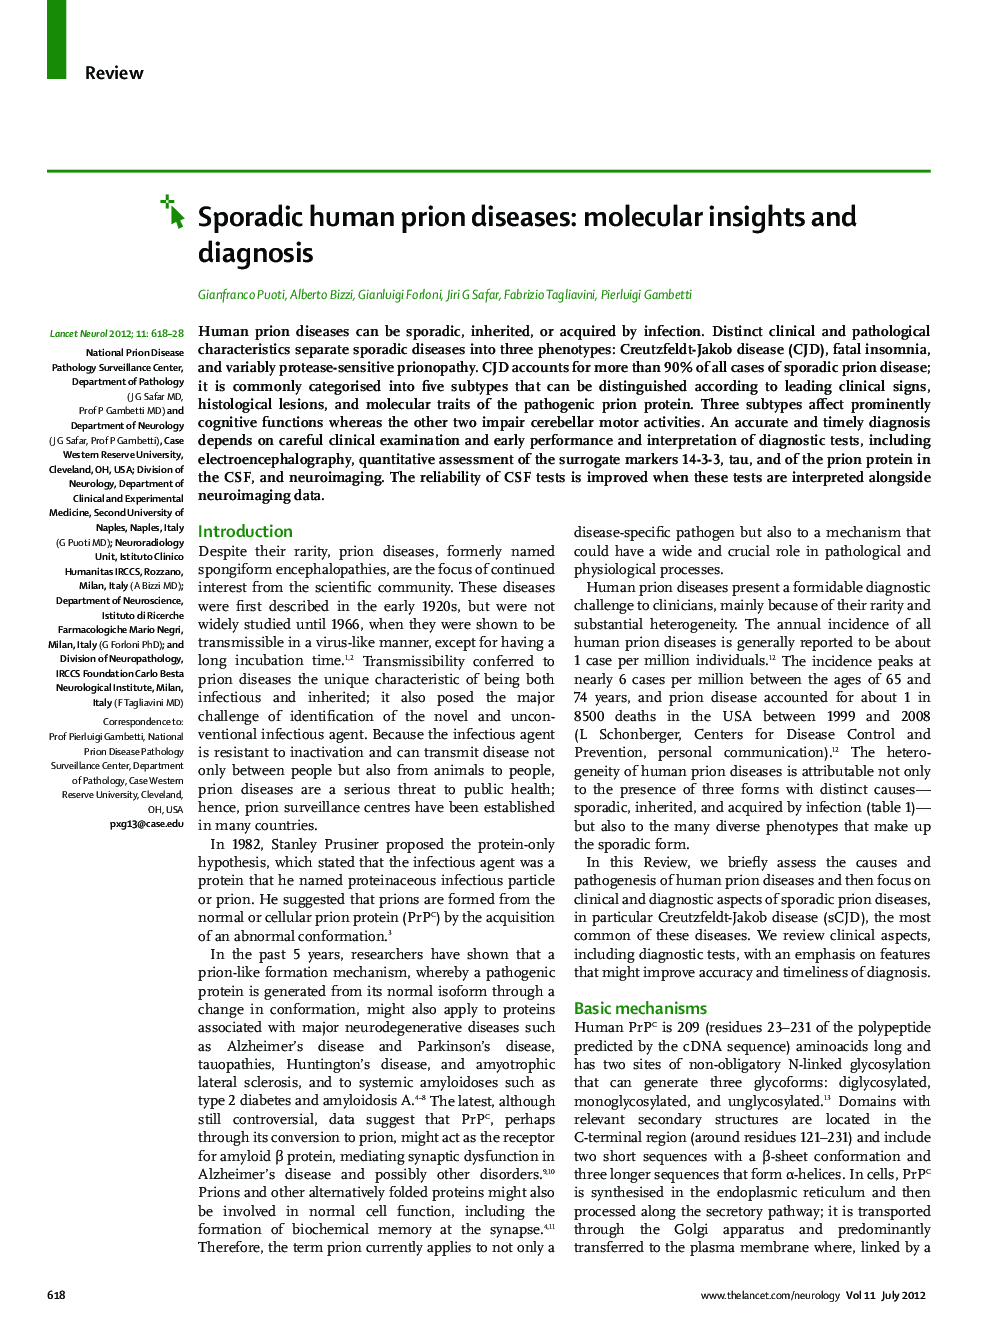 Sporadic human prion diseases: molecular insights and diagnosis